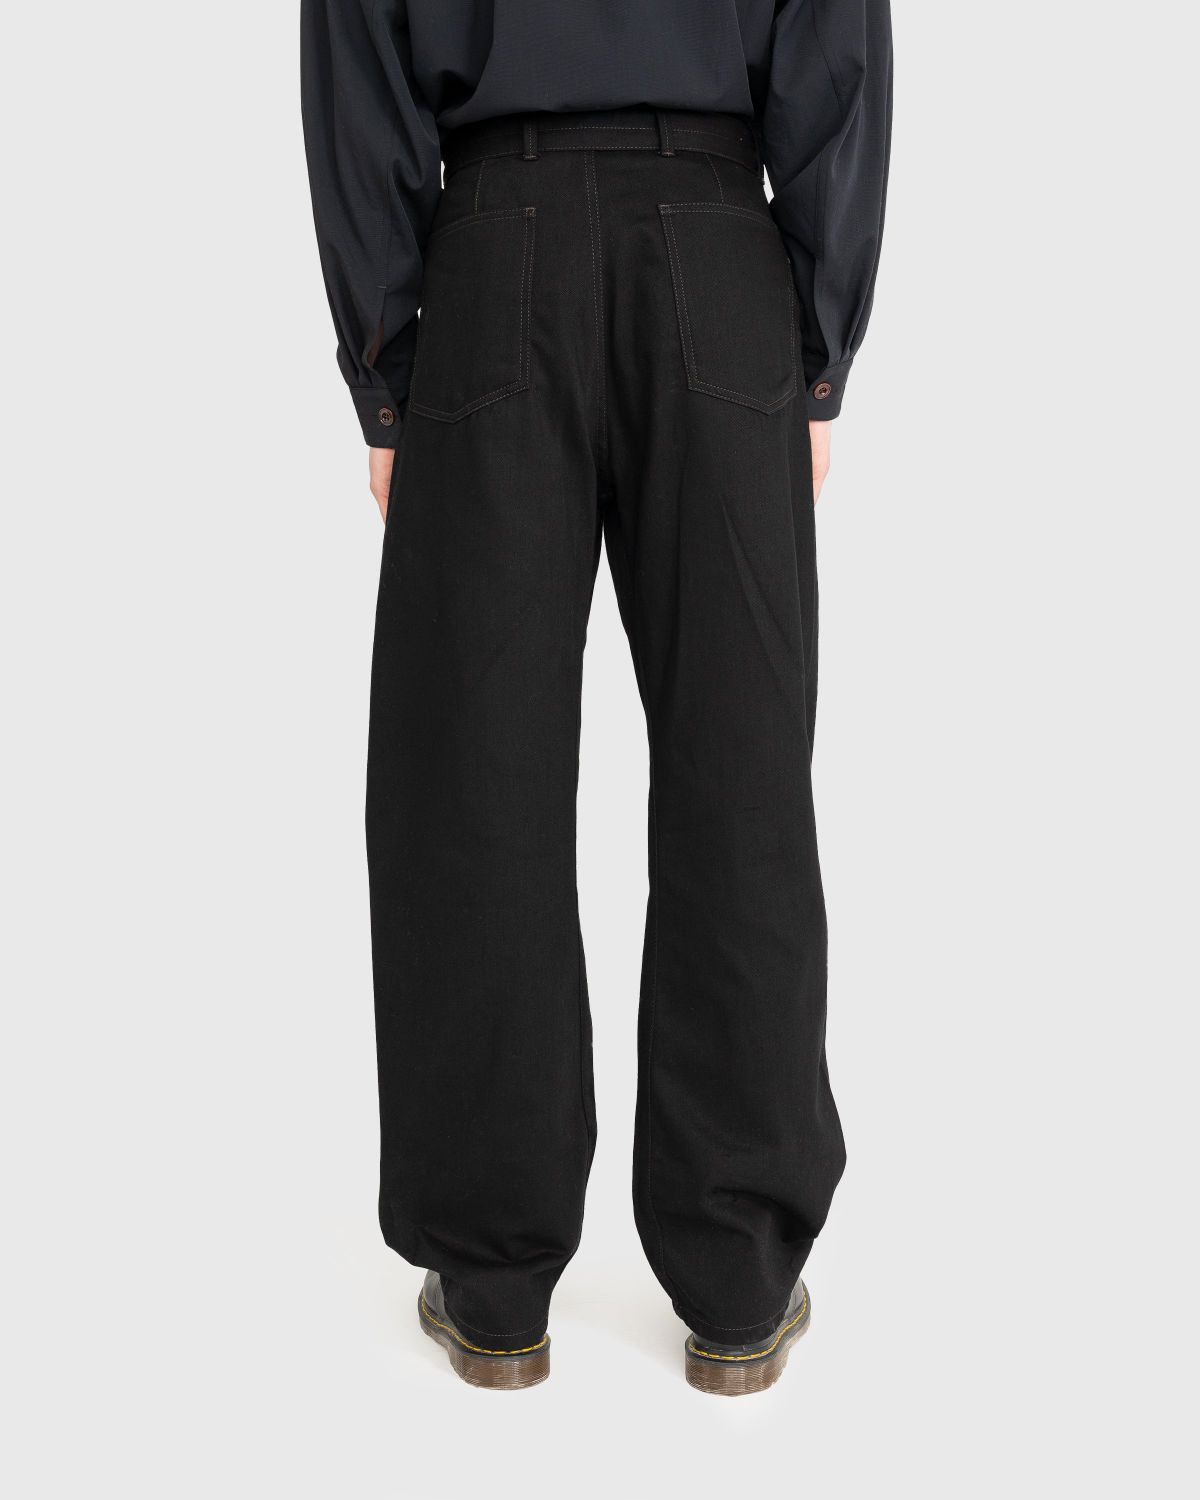 Lemaire – Twisted Belted Pants Black - Trousers - Black - Image 3